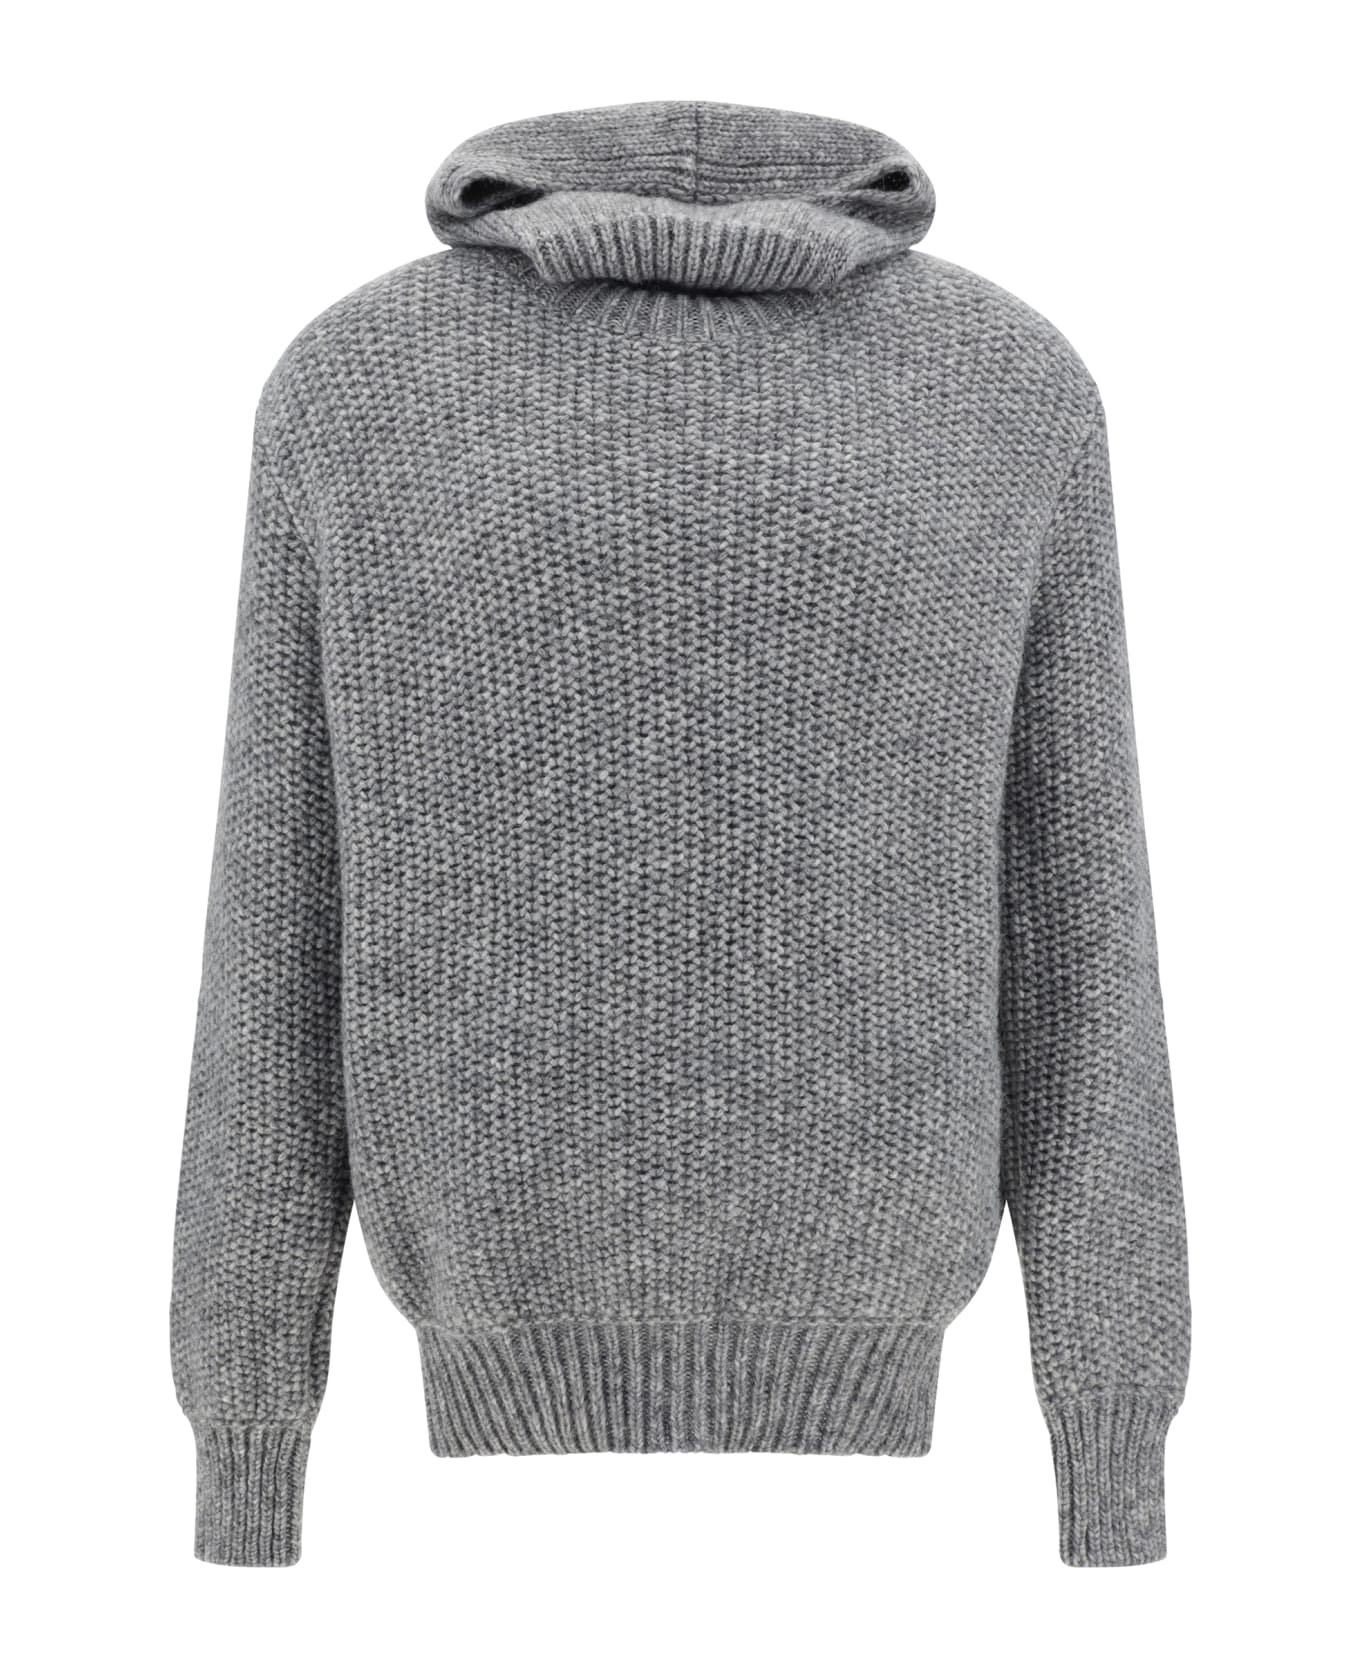 Never Enough Sweater - Middle Grey